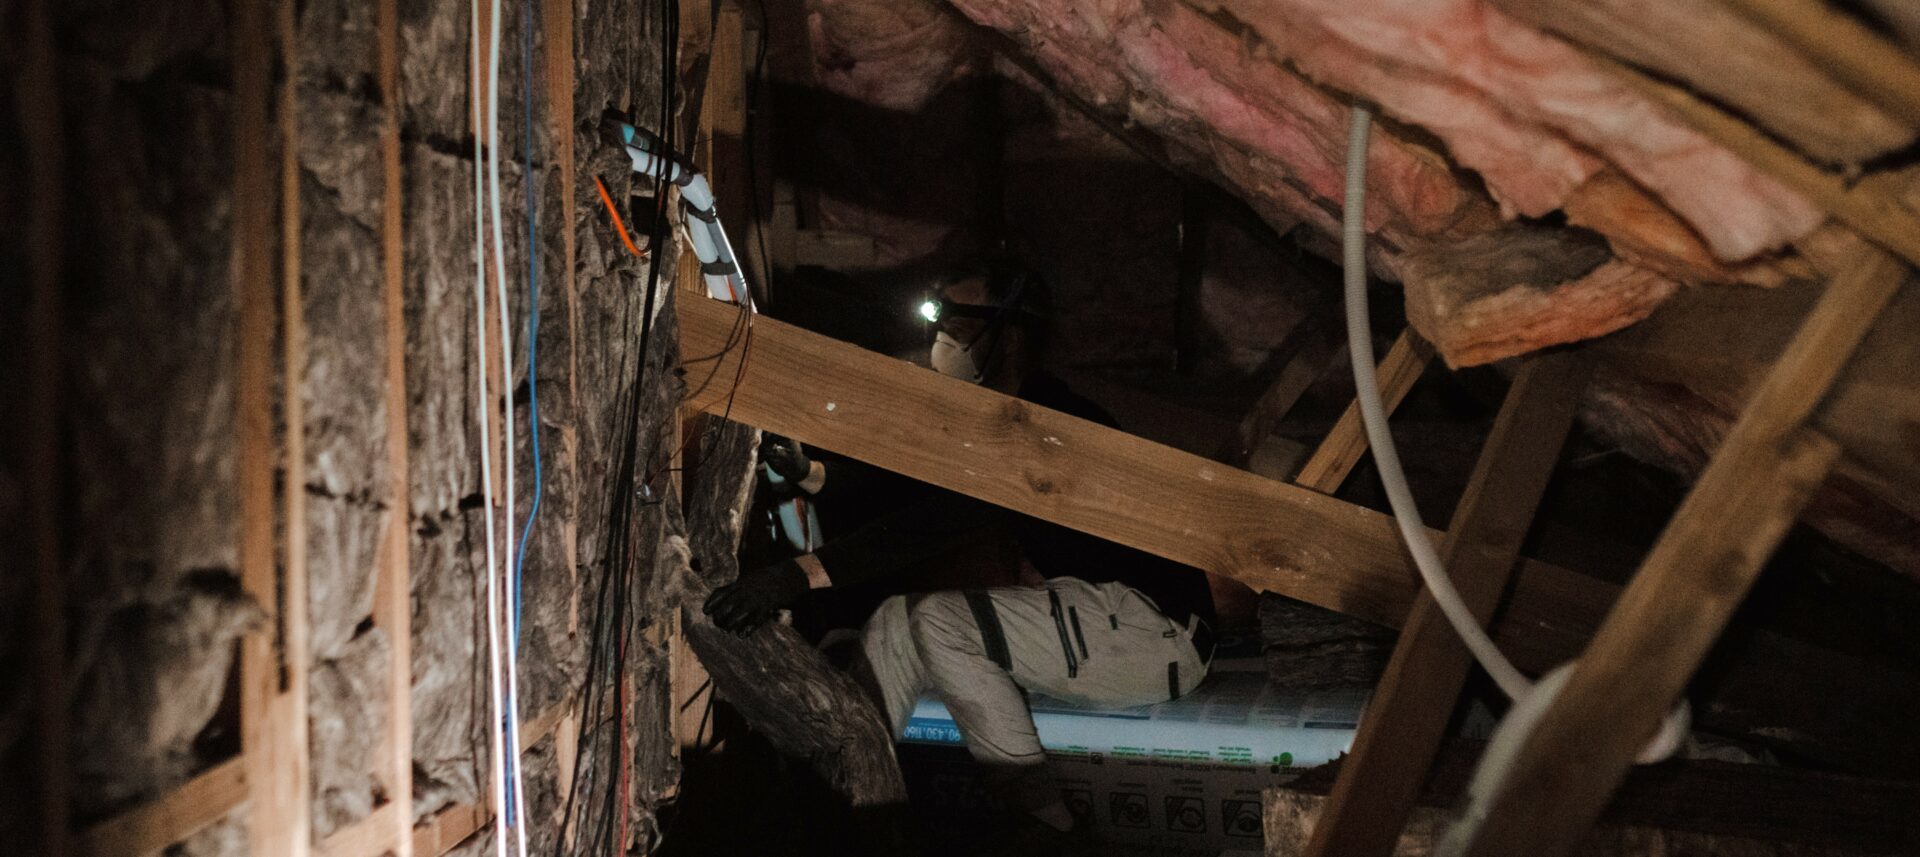 A certified insulation installer works in a crammed roof space, surrounded by timber joists and electrical wires.